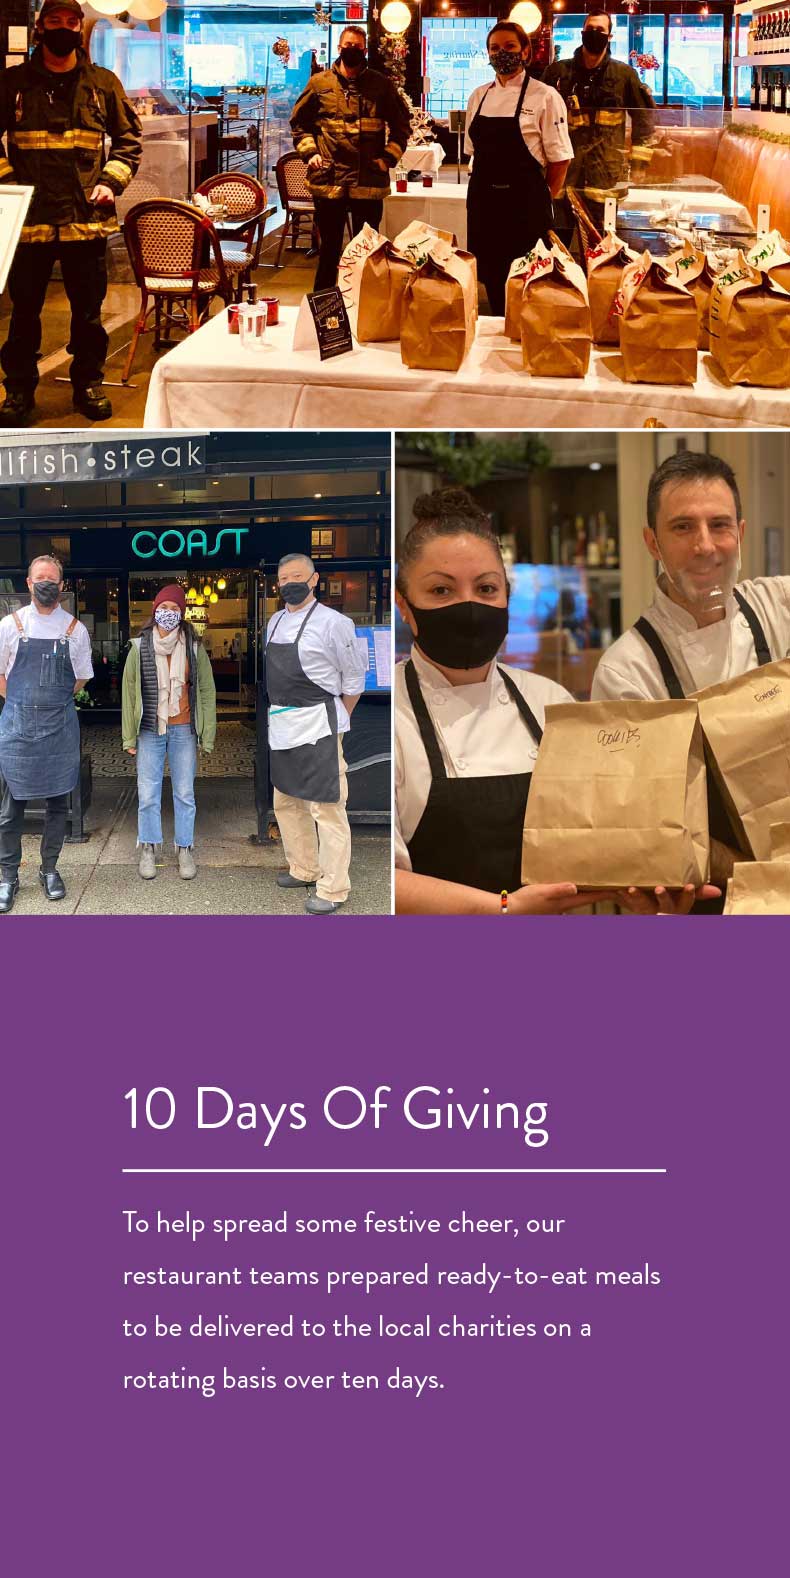 To help spread some festive cheer, our restaurant teams prepared ready-to-eat meals to be delivered to the local charities on a rotating basis over ten days.